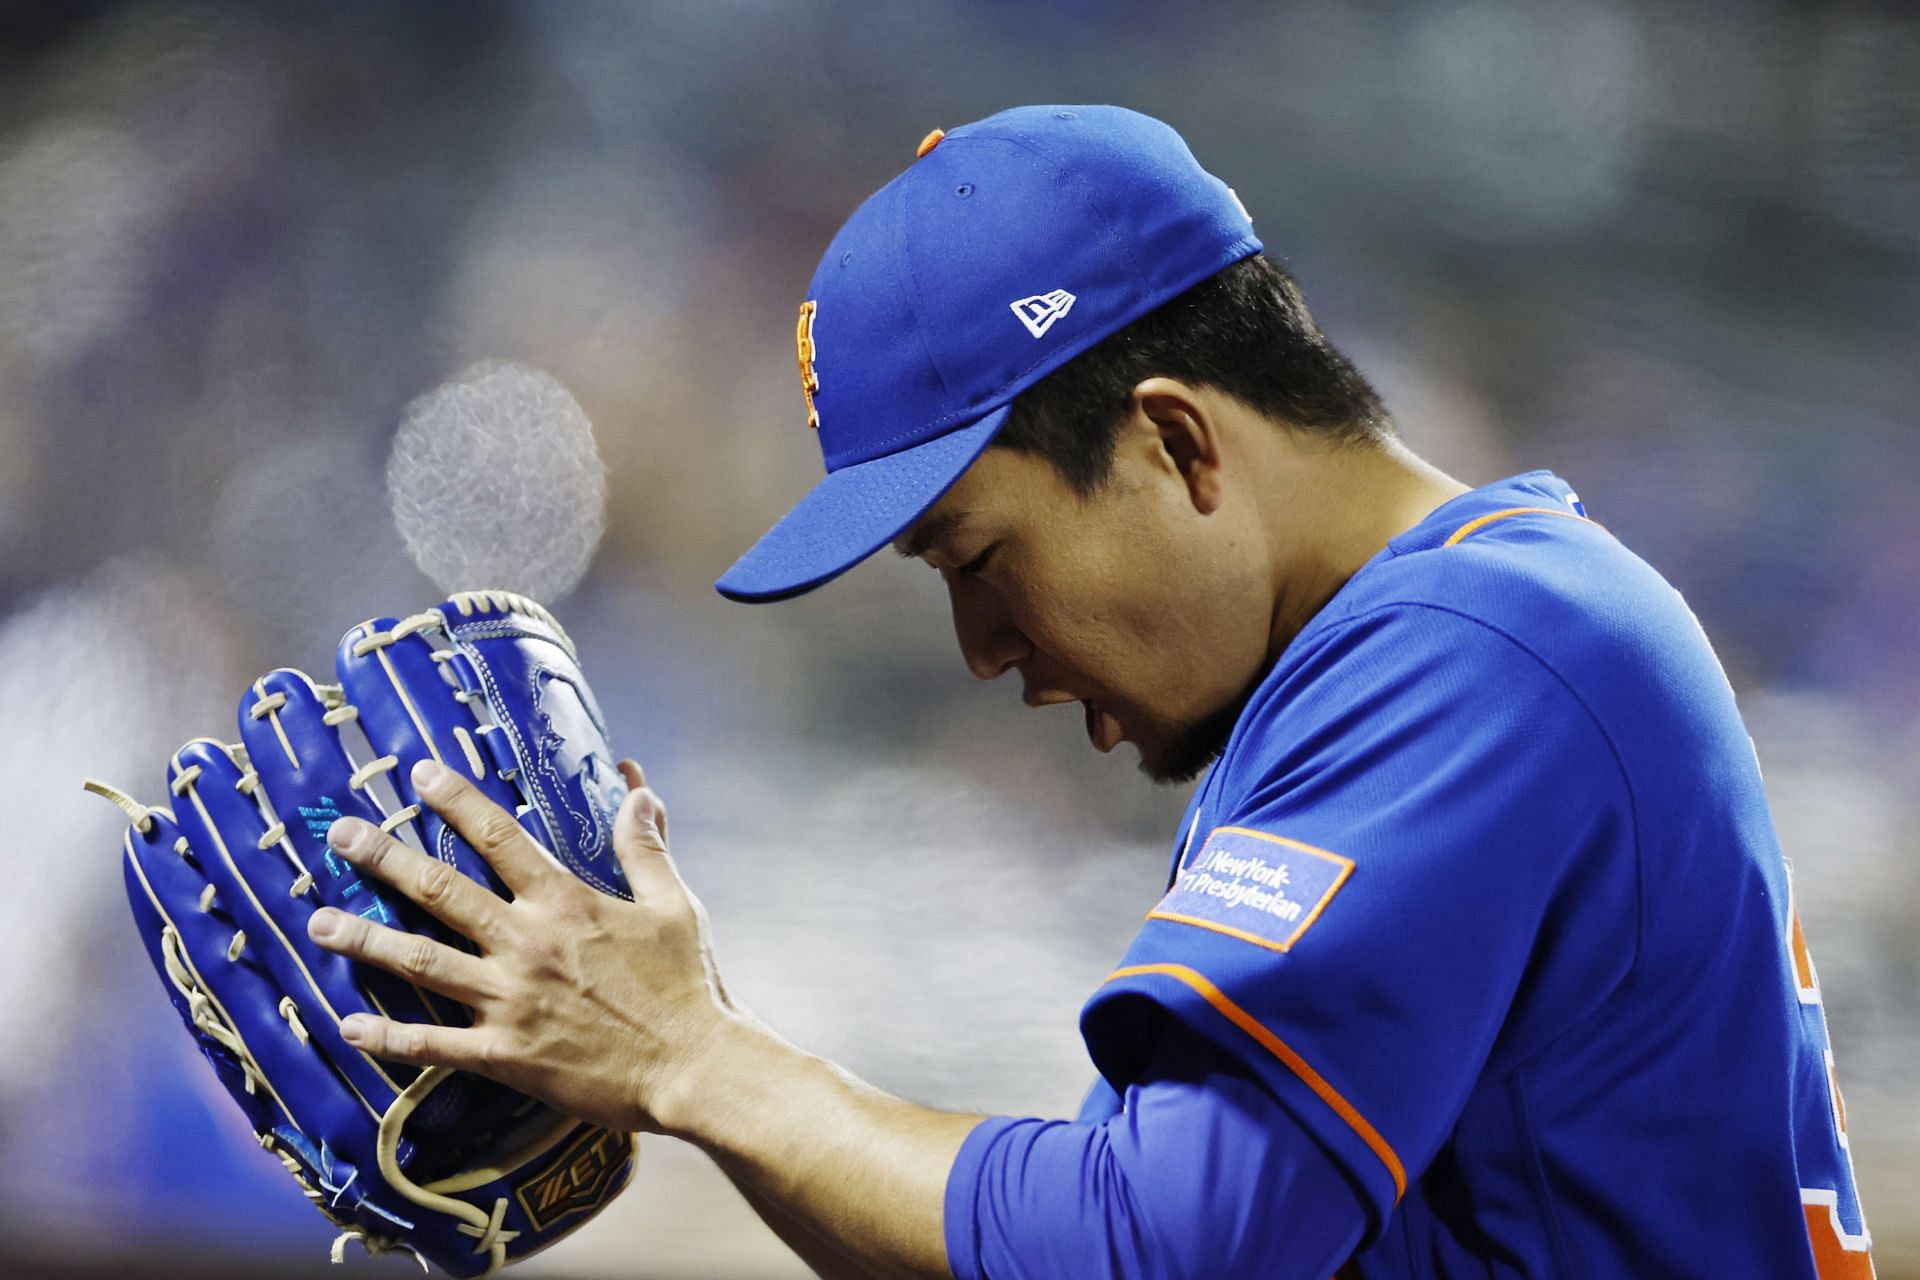 Mets pitcher Kodai Senga relieved at avoiding boos in front of family: I'm  just glad I didn't get booed when they were there